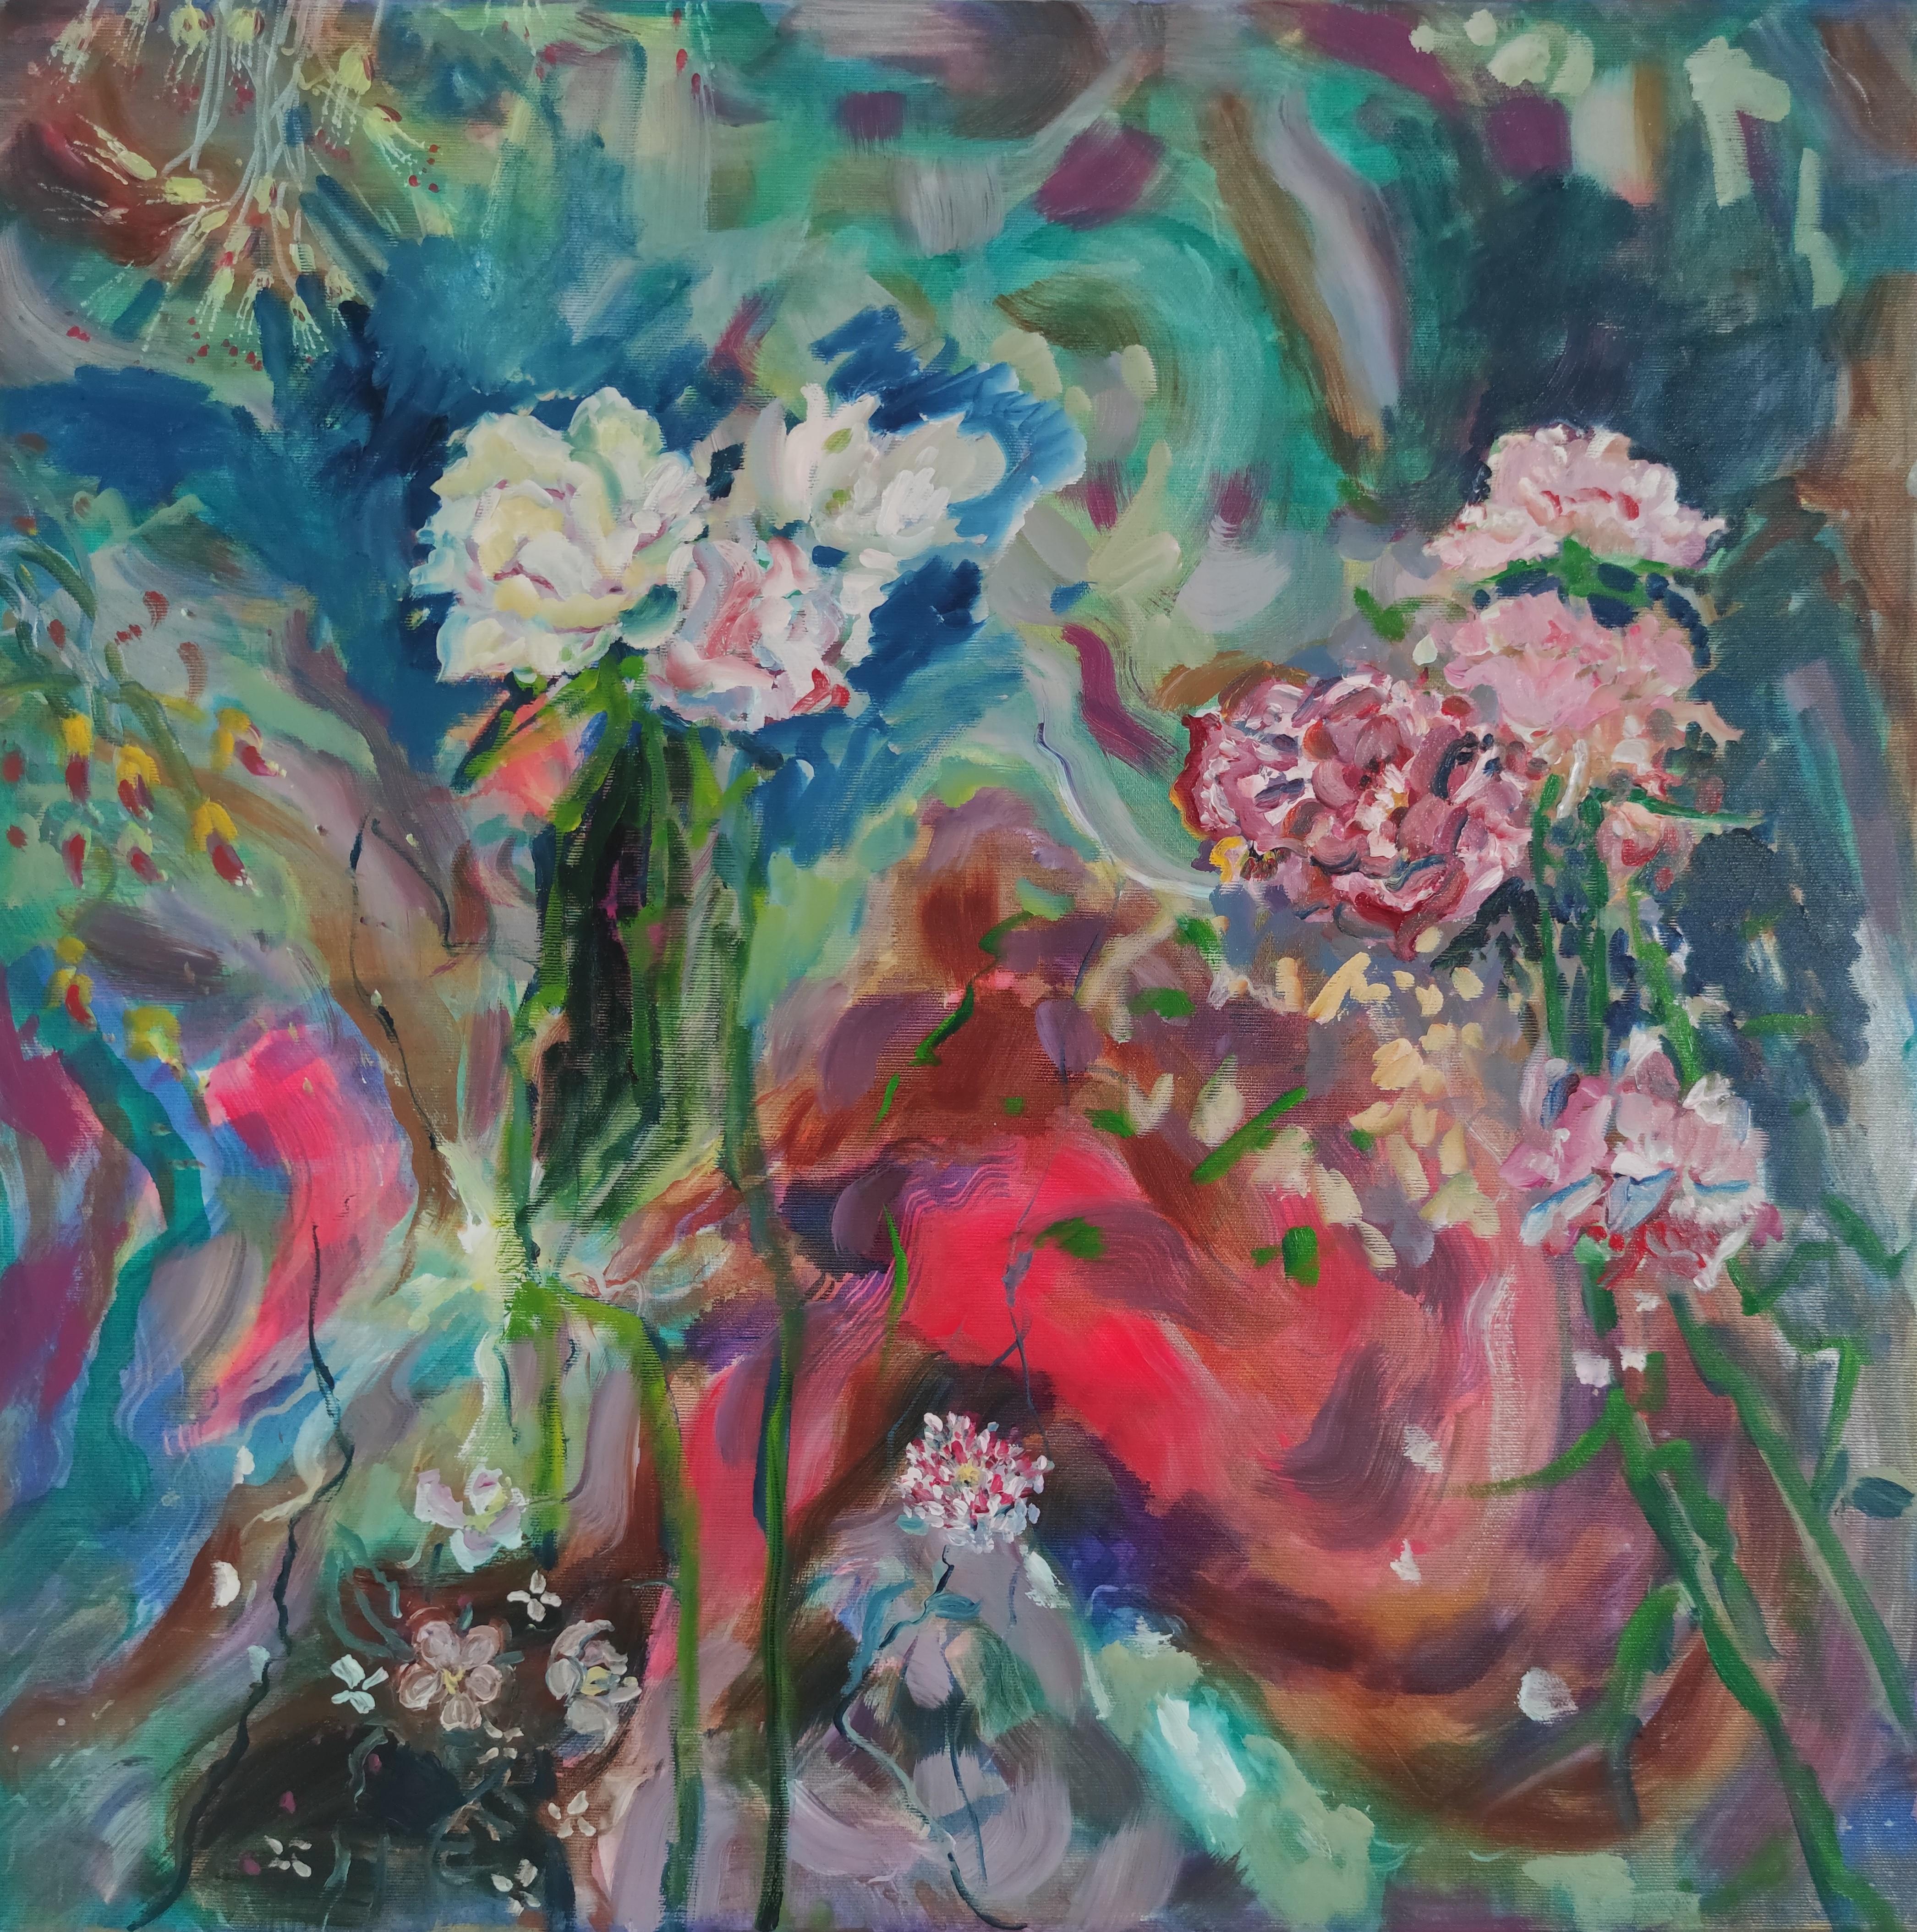 Linda Clerget Abstract Painting - "Cosmos Roses" - Gestural and abstract canvas around the cosmos and roses